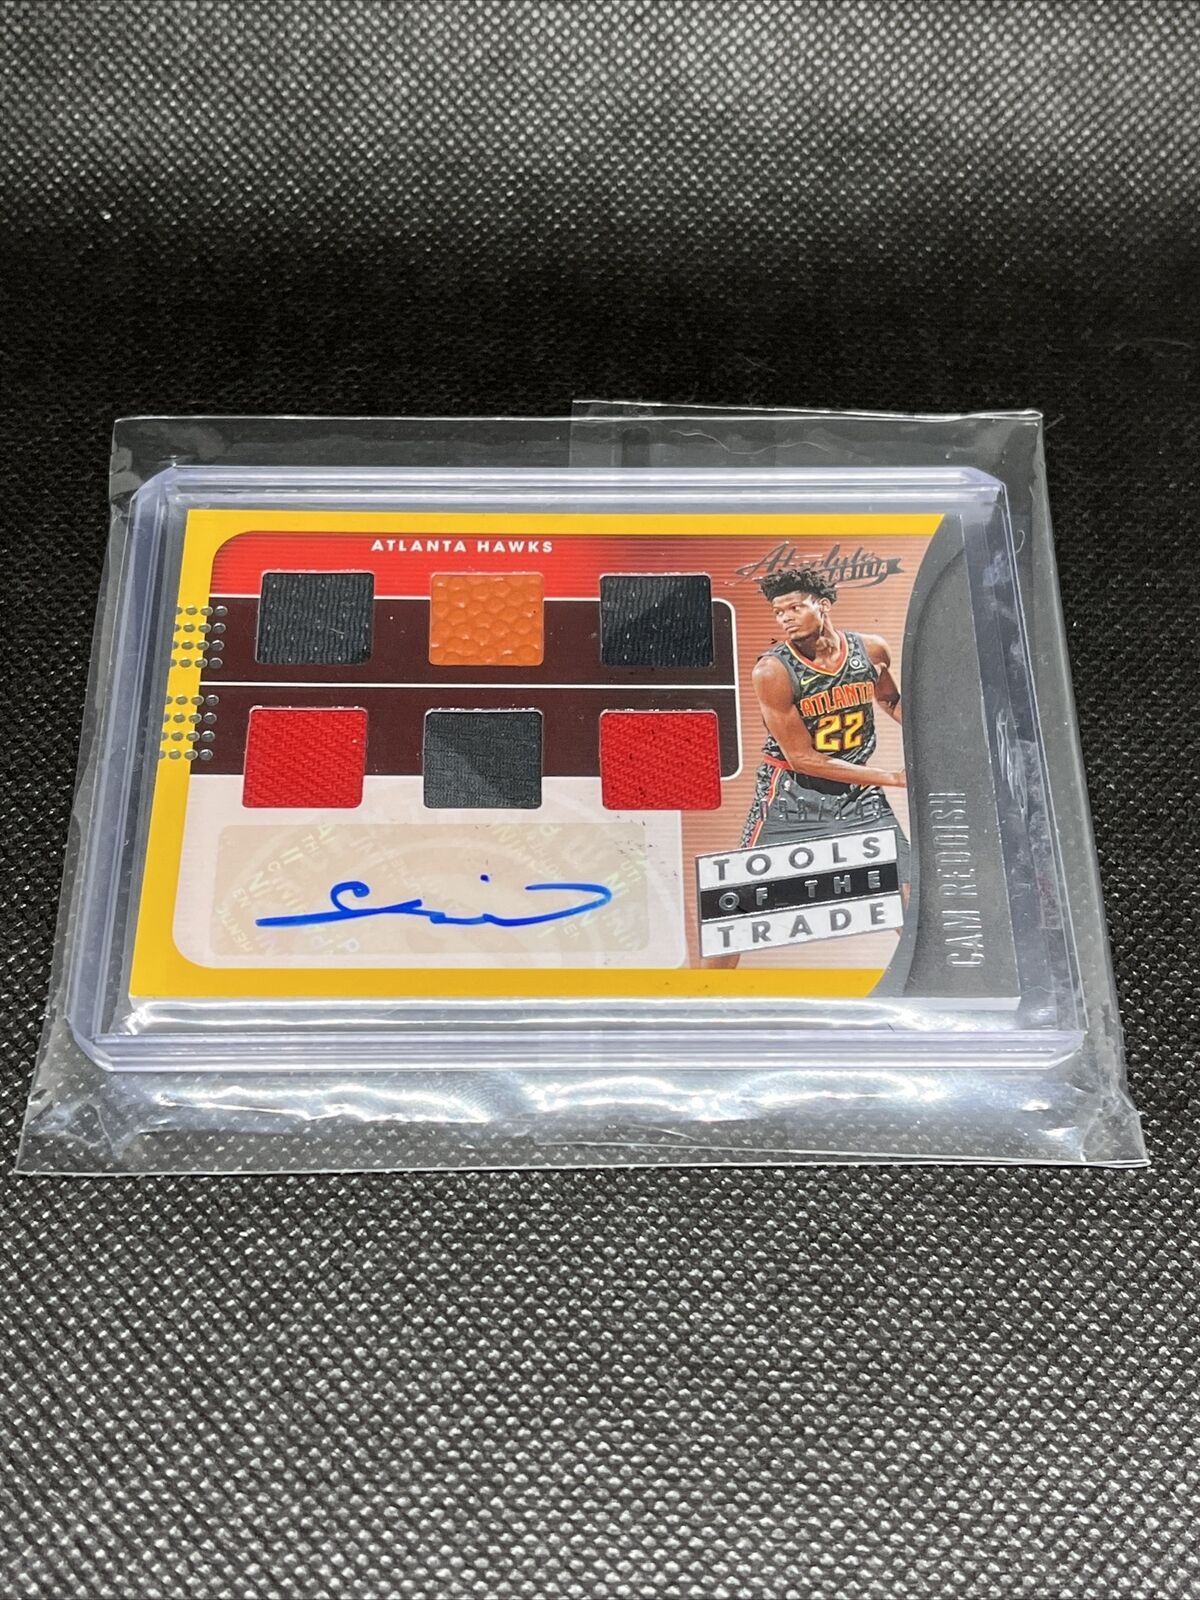 2019-20 Absolute Cam Reddish Tools Of Trade Level 1 Six Patch Auto RC #/149